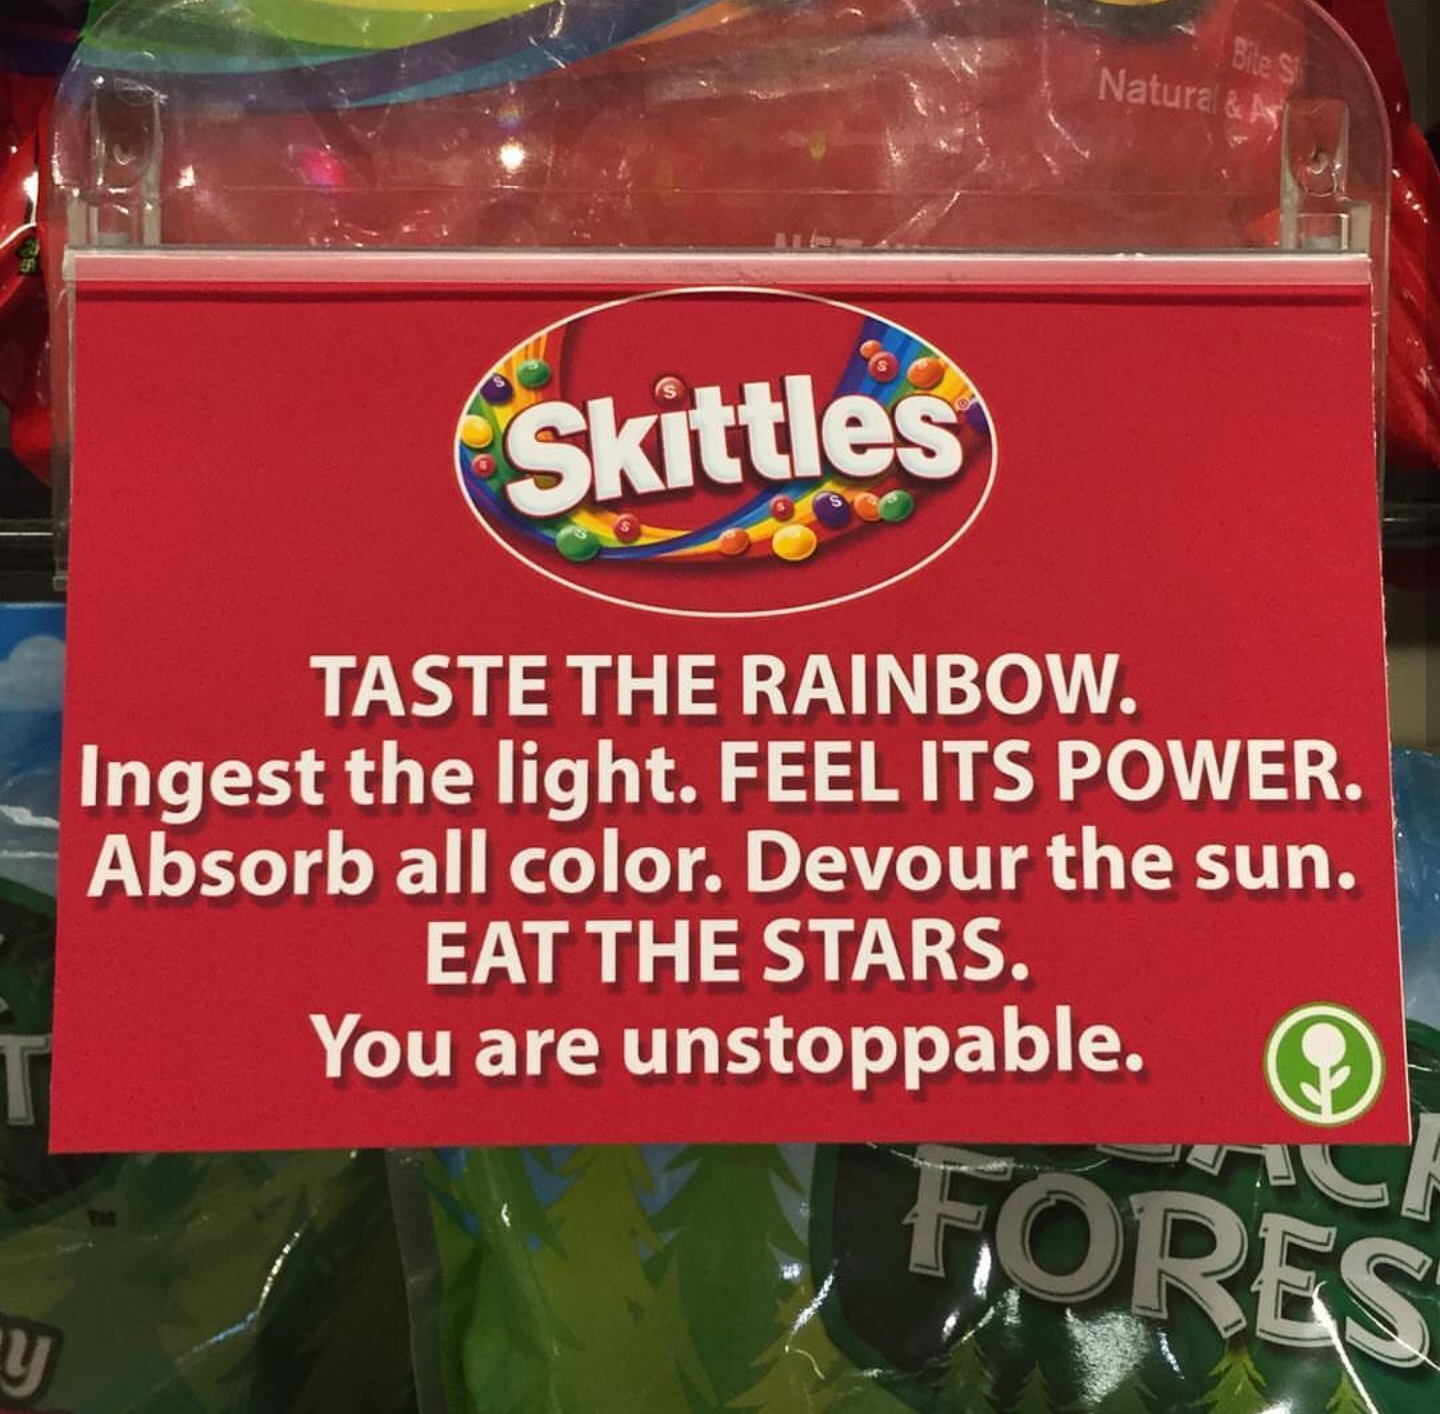 skittles - Skittles Taste The Rainbow. Ingest the light. Feel Its Power Absorb all color. Devour the sun. Eat The Stars. You are unstoppable.